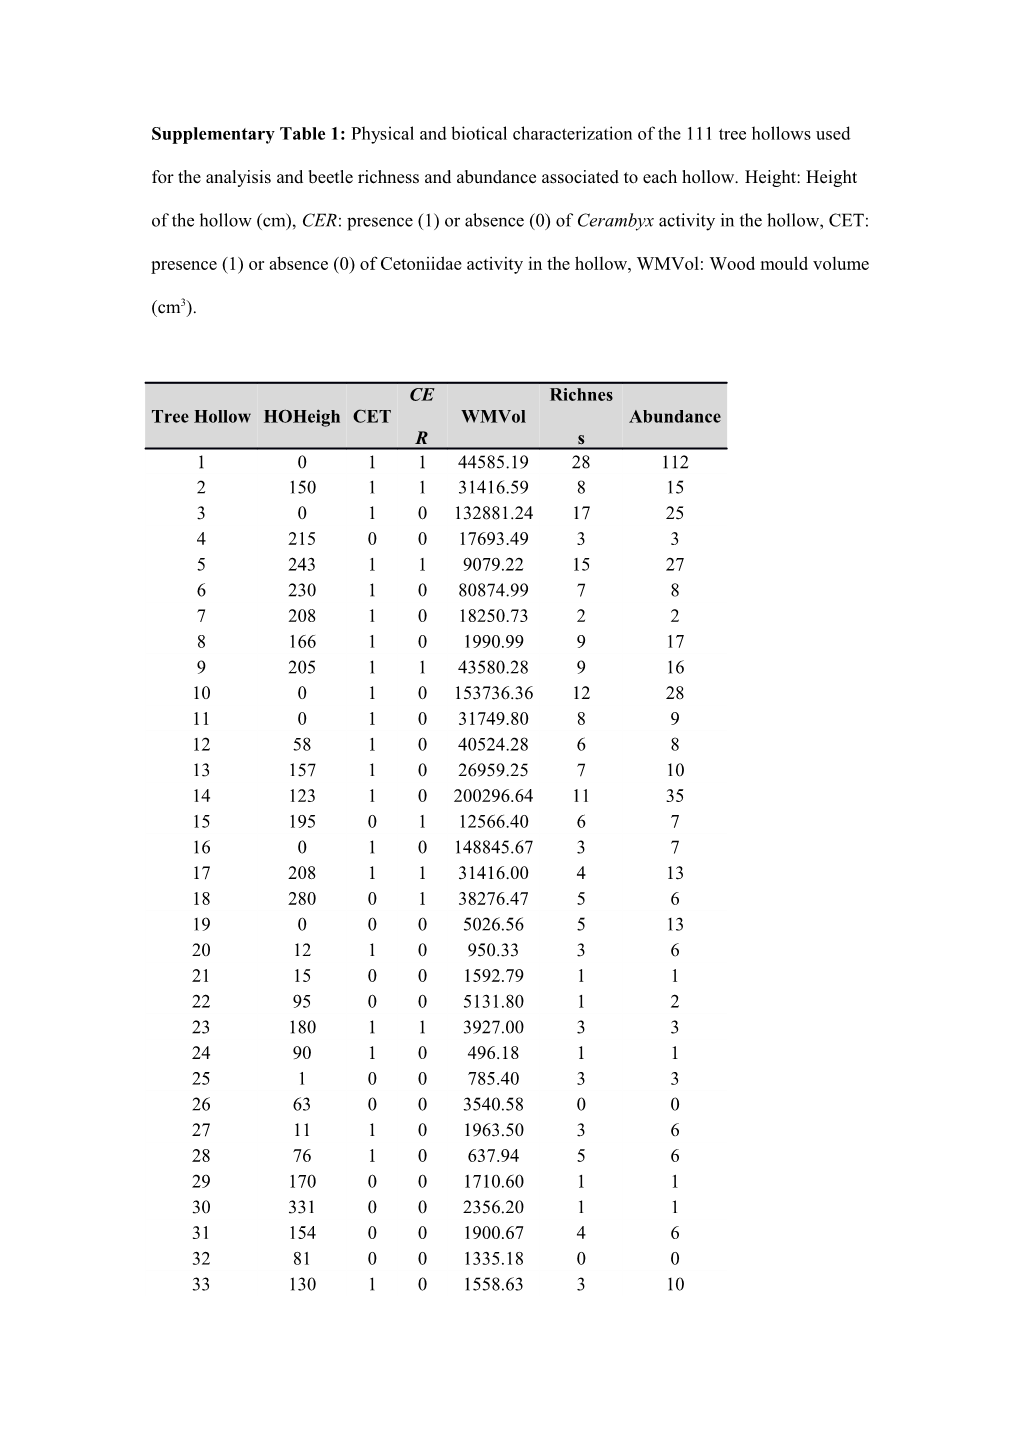 Supplementary Table 1: Physical and Biotical Characterization of the 111 Tree Hollows